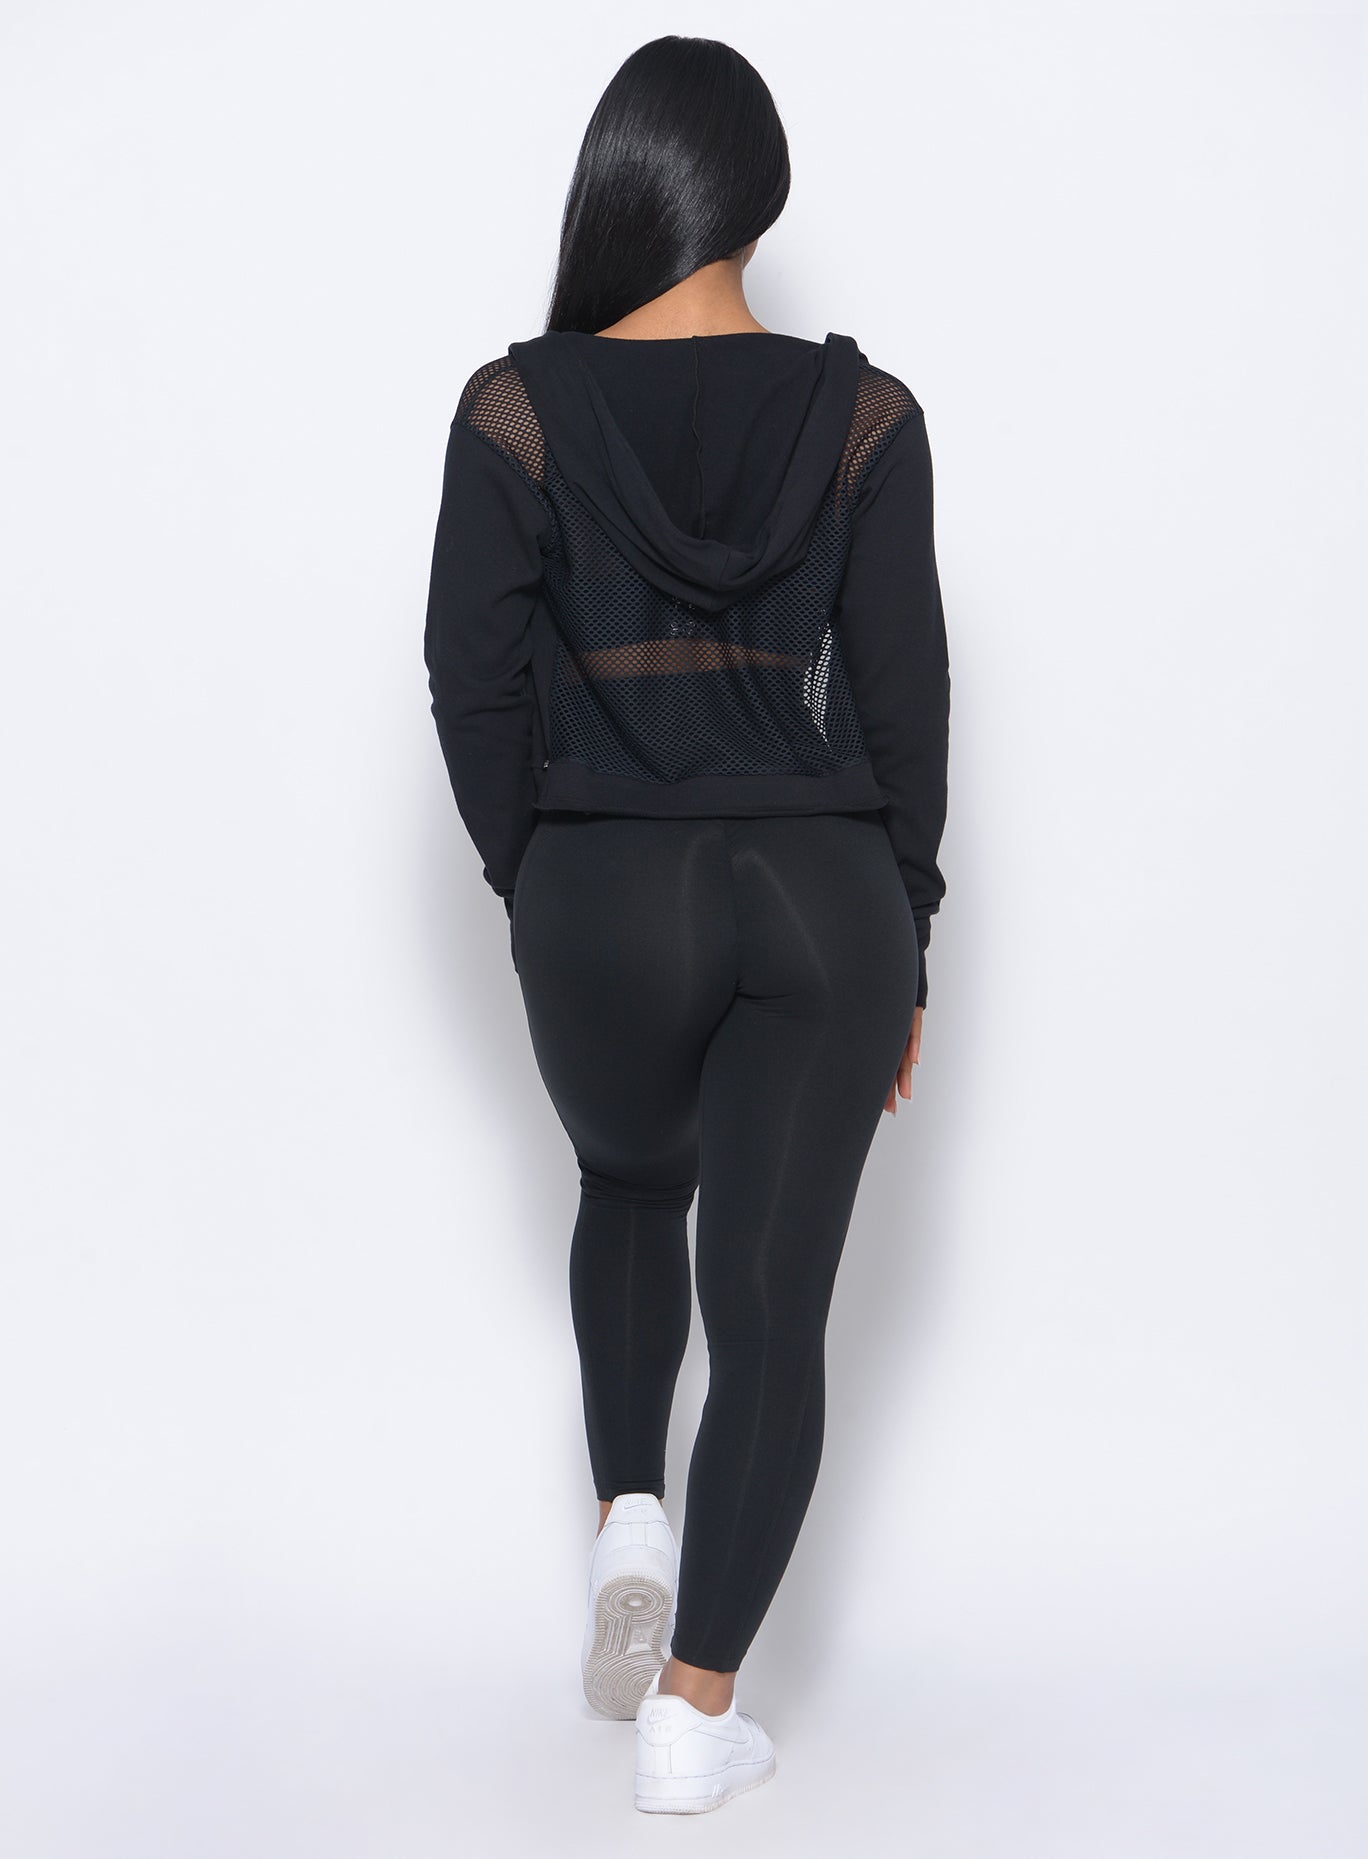 back profile of model wearing the waist cincher leggings in black and a matching jacket 